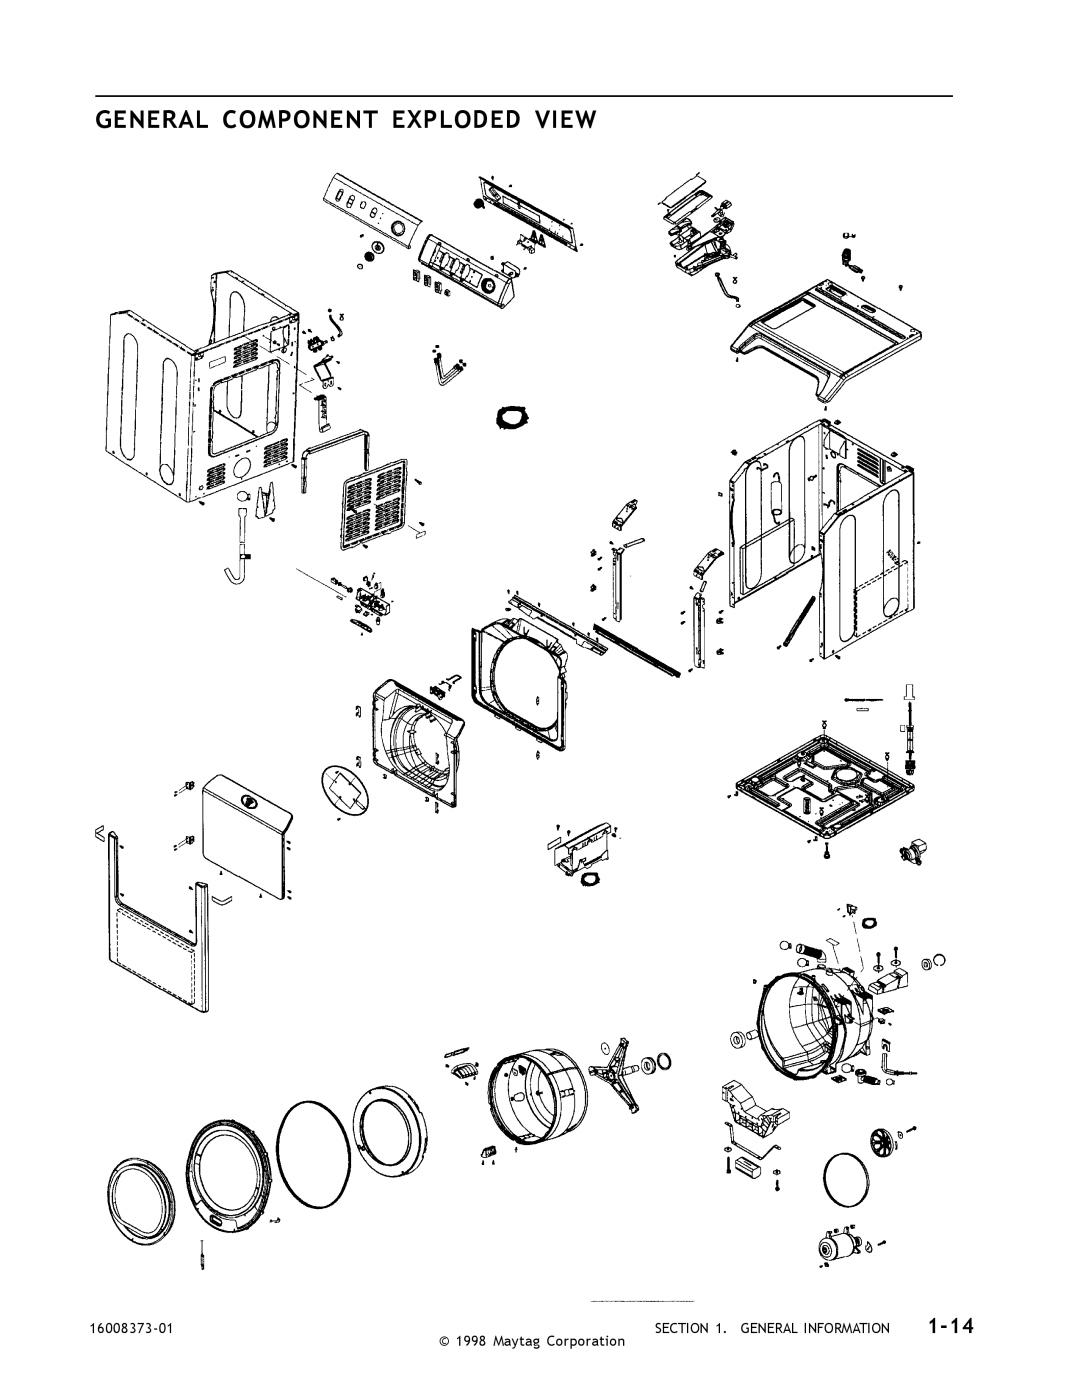 Whirlpool MAH3000 General Component Exploded View, 1-14, General Information, Maytag Corporation, 16008373-01 